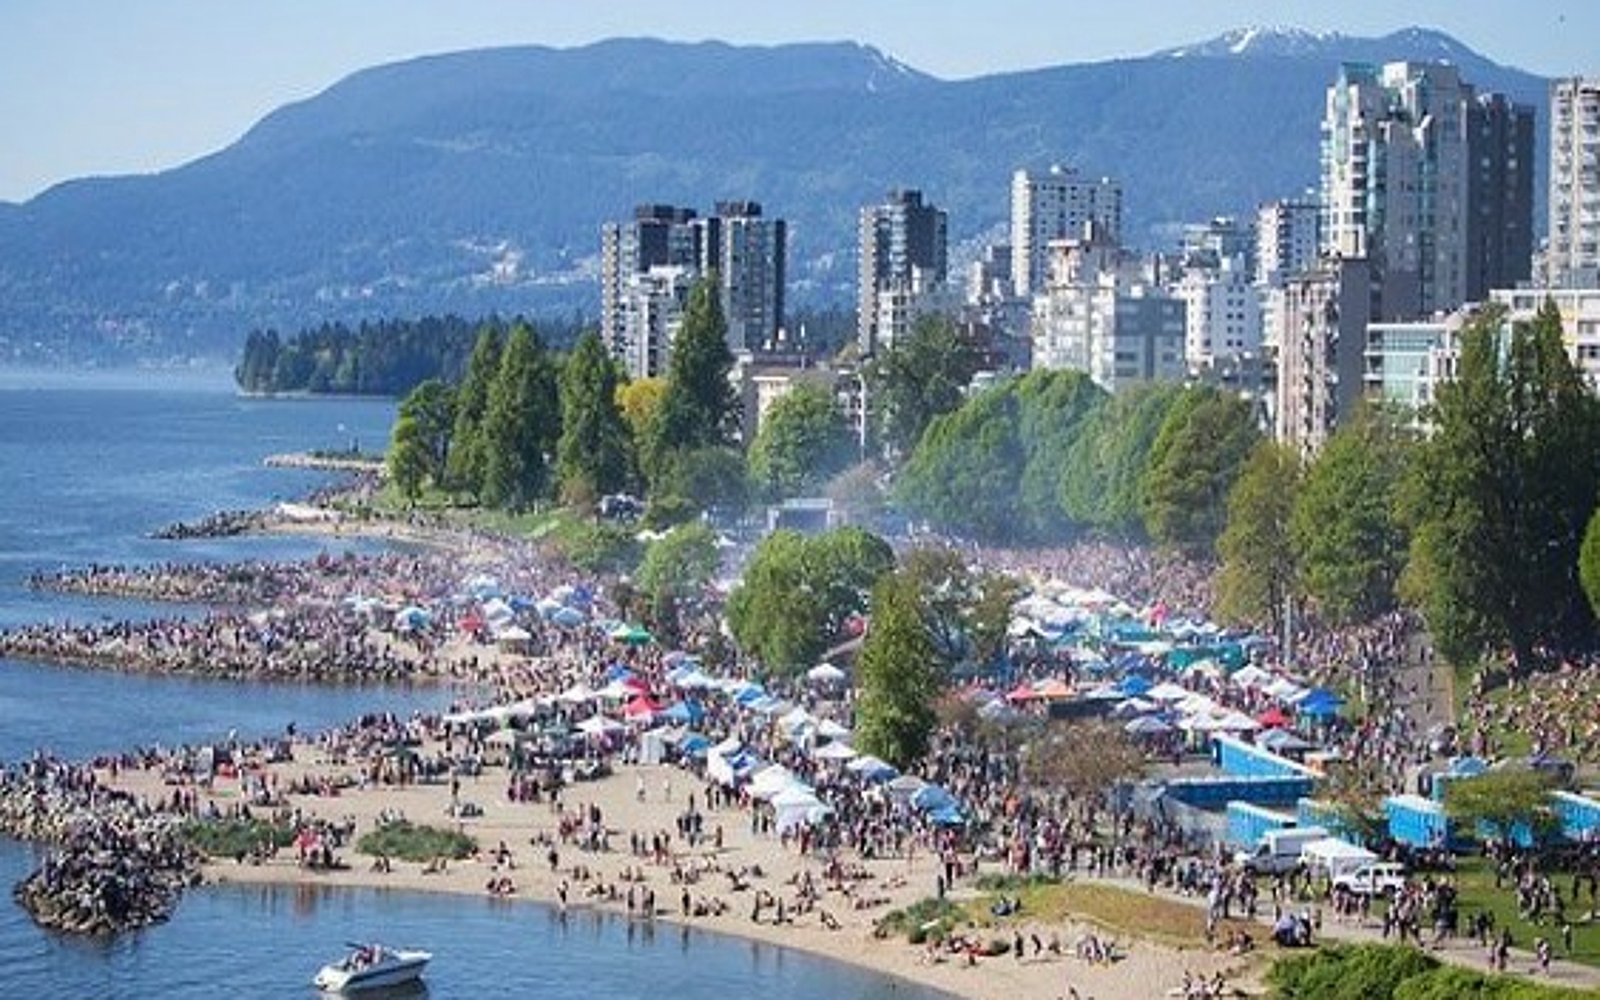 An aerial view of Vancouver's 4/20 Festival